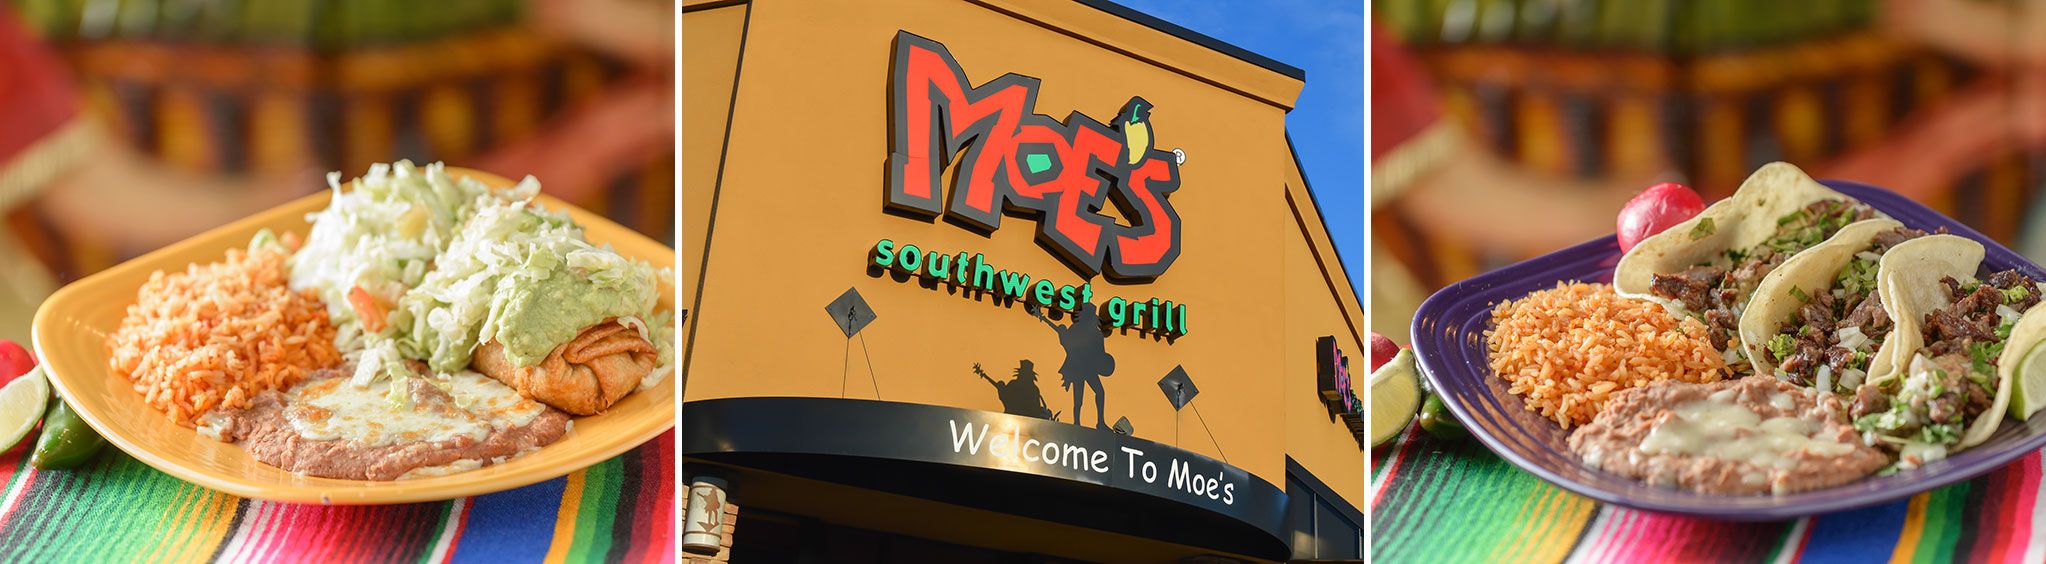 Moe's Southwest Grill at Opry Mills